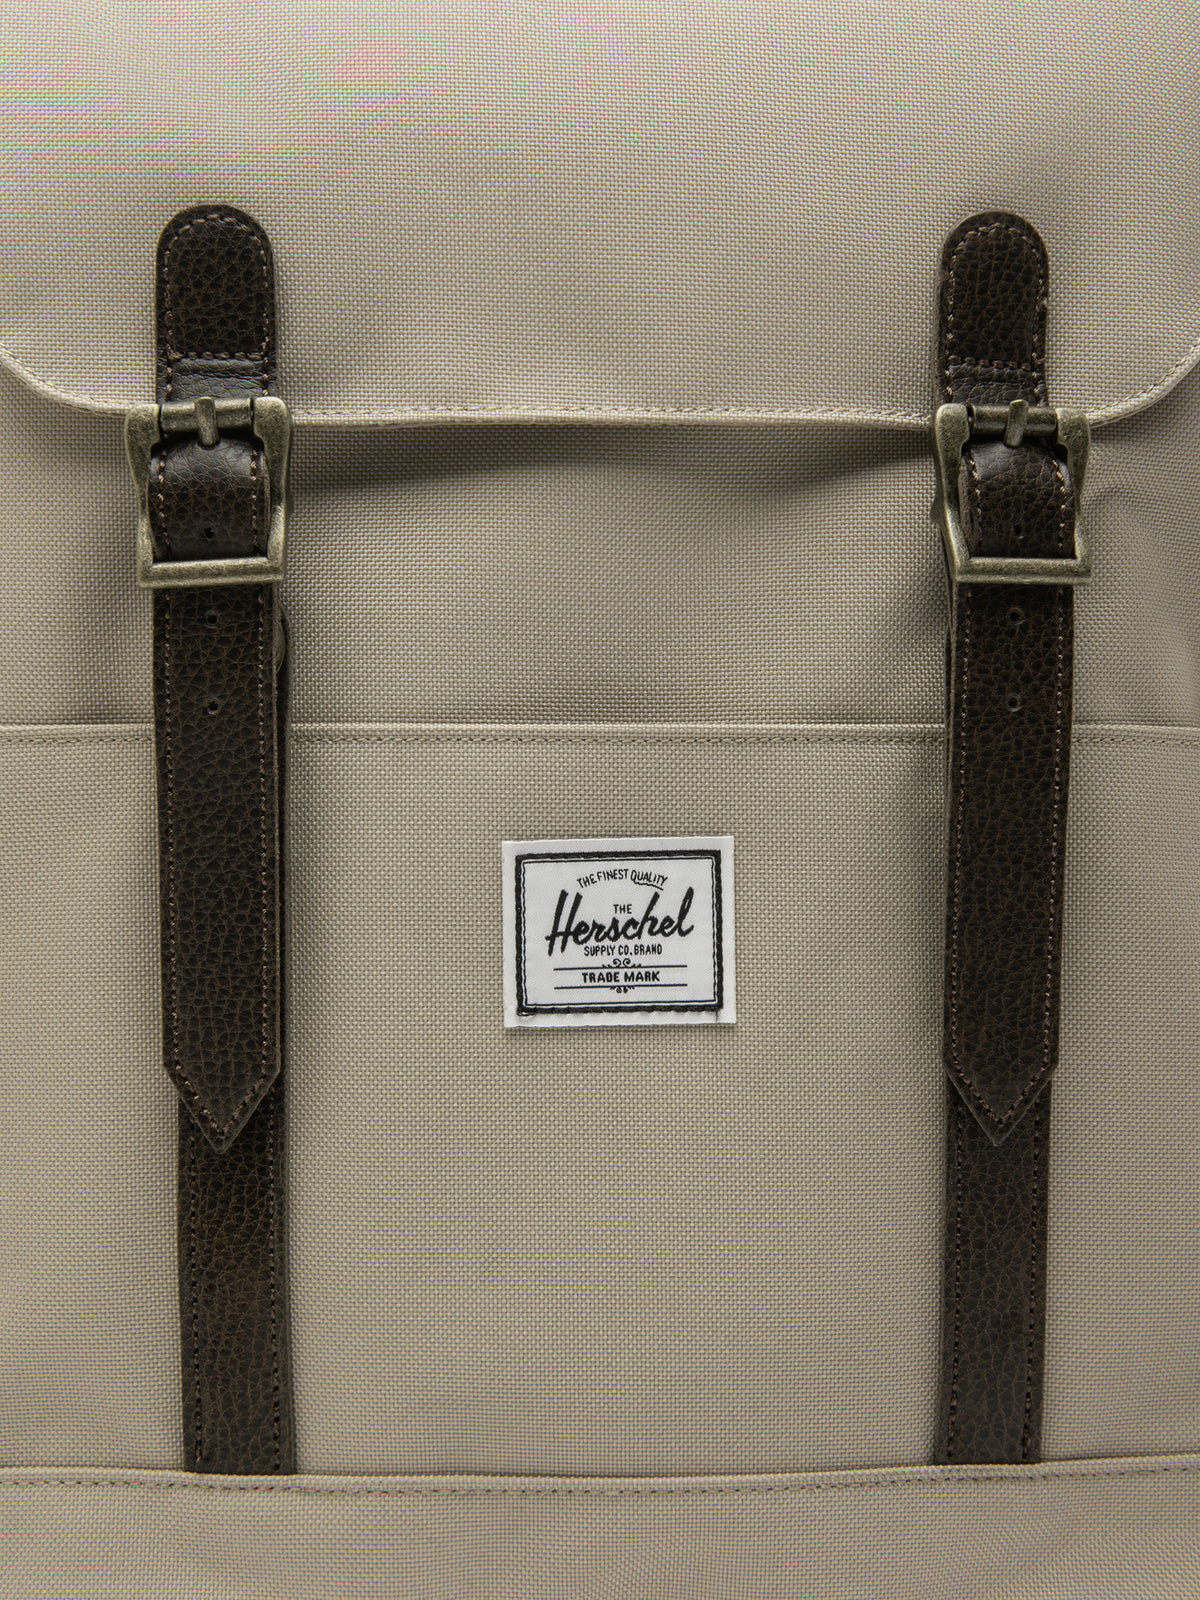 Retreat Small Backpack in Taupe